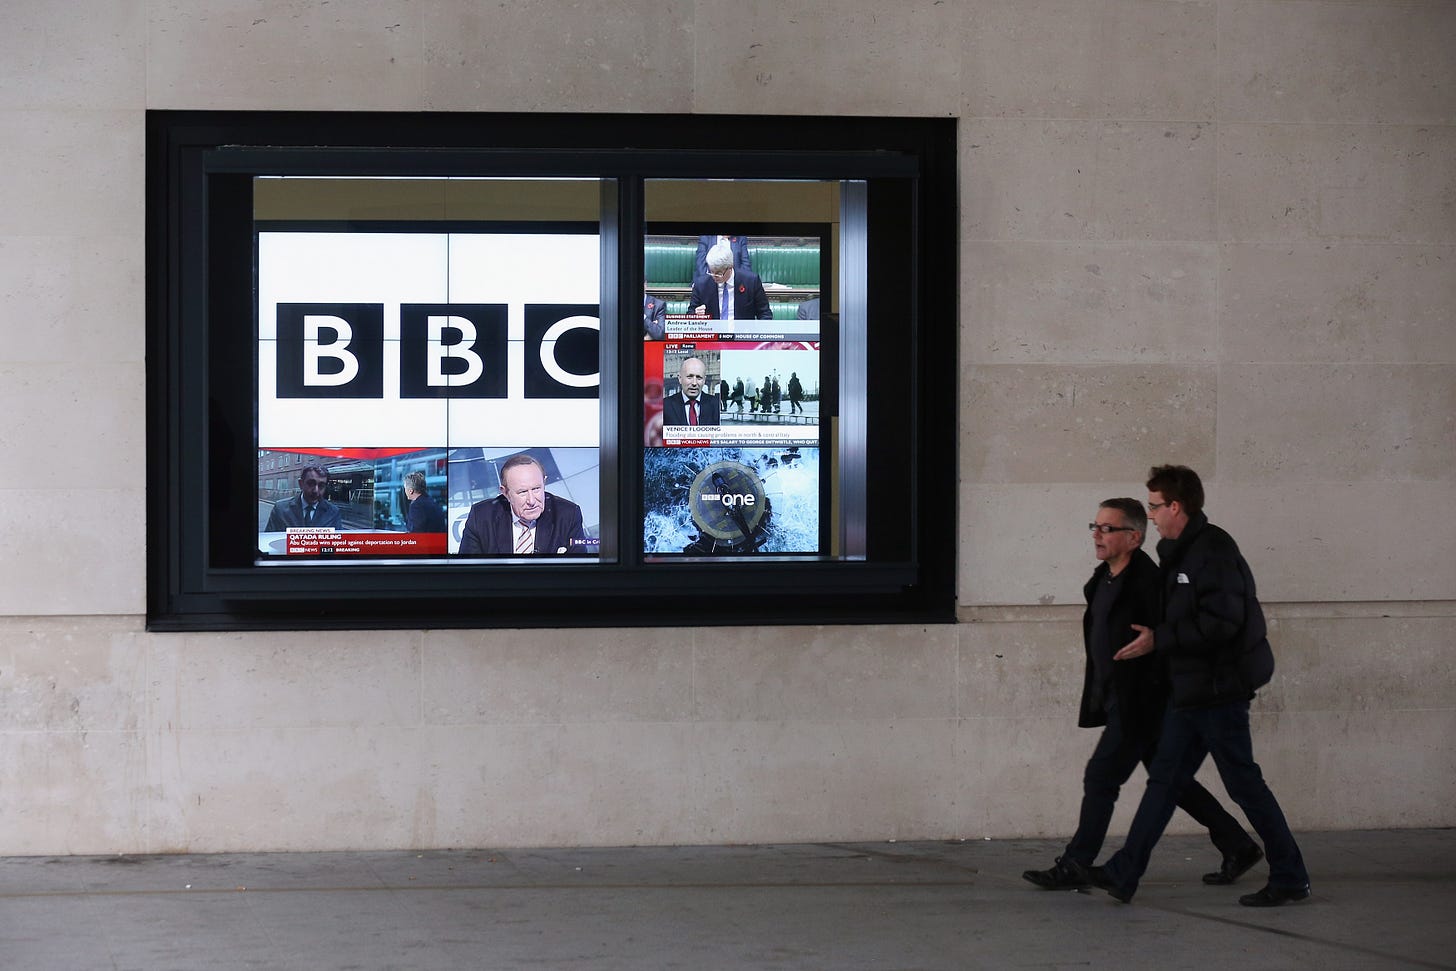 Men walk past a bank of television screens displaying BBC channels in the BBC headquarters at New Broadcasting House on November 12, 2012 in London, England. 